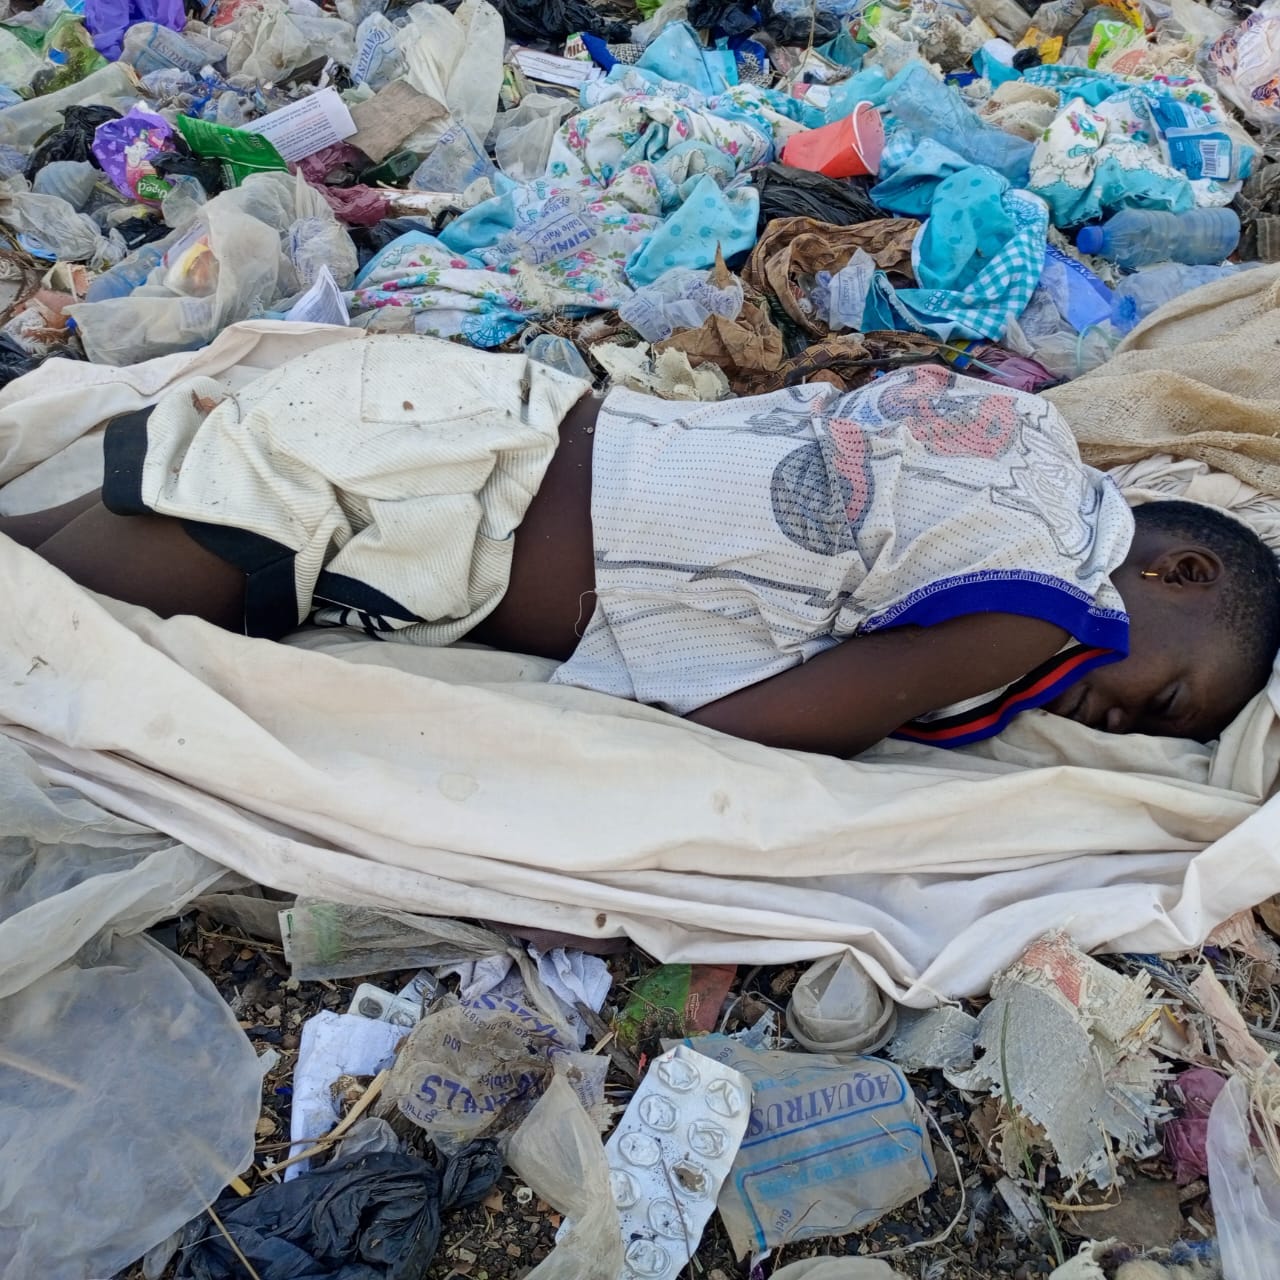 Body of young woman discovered in refuse dump in Makurdi